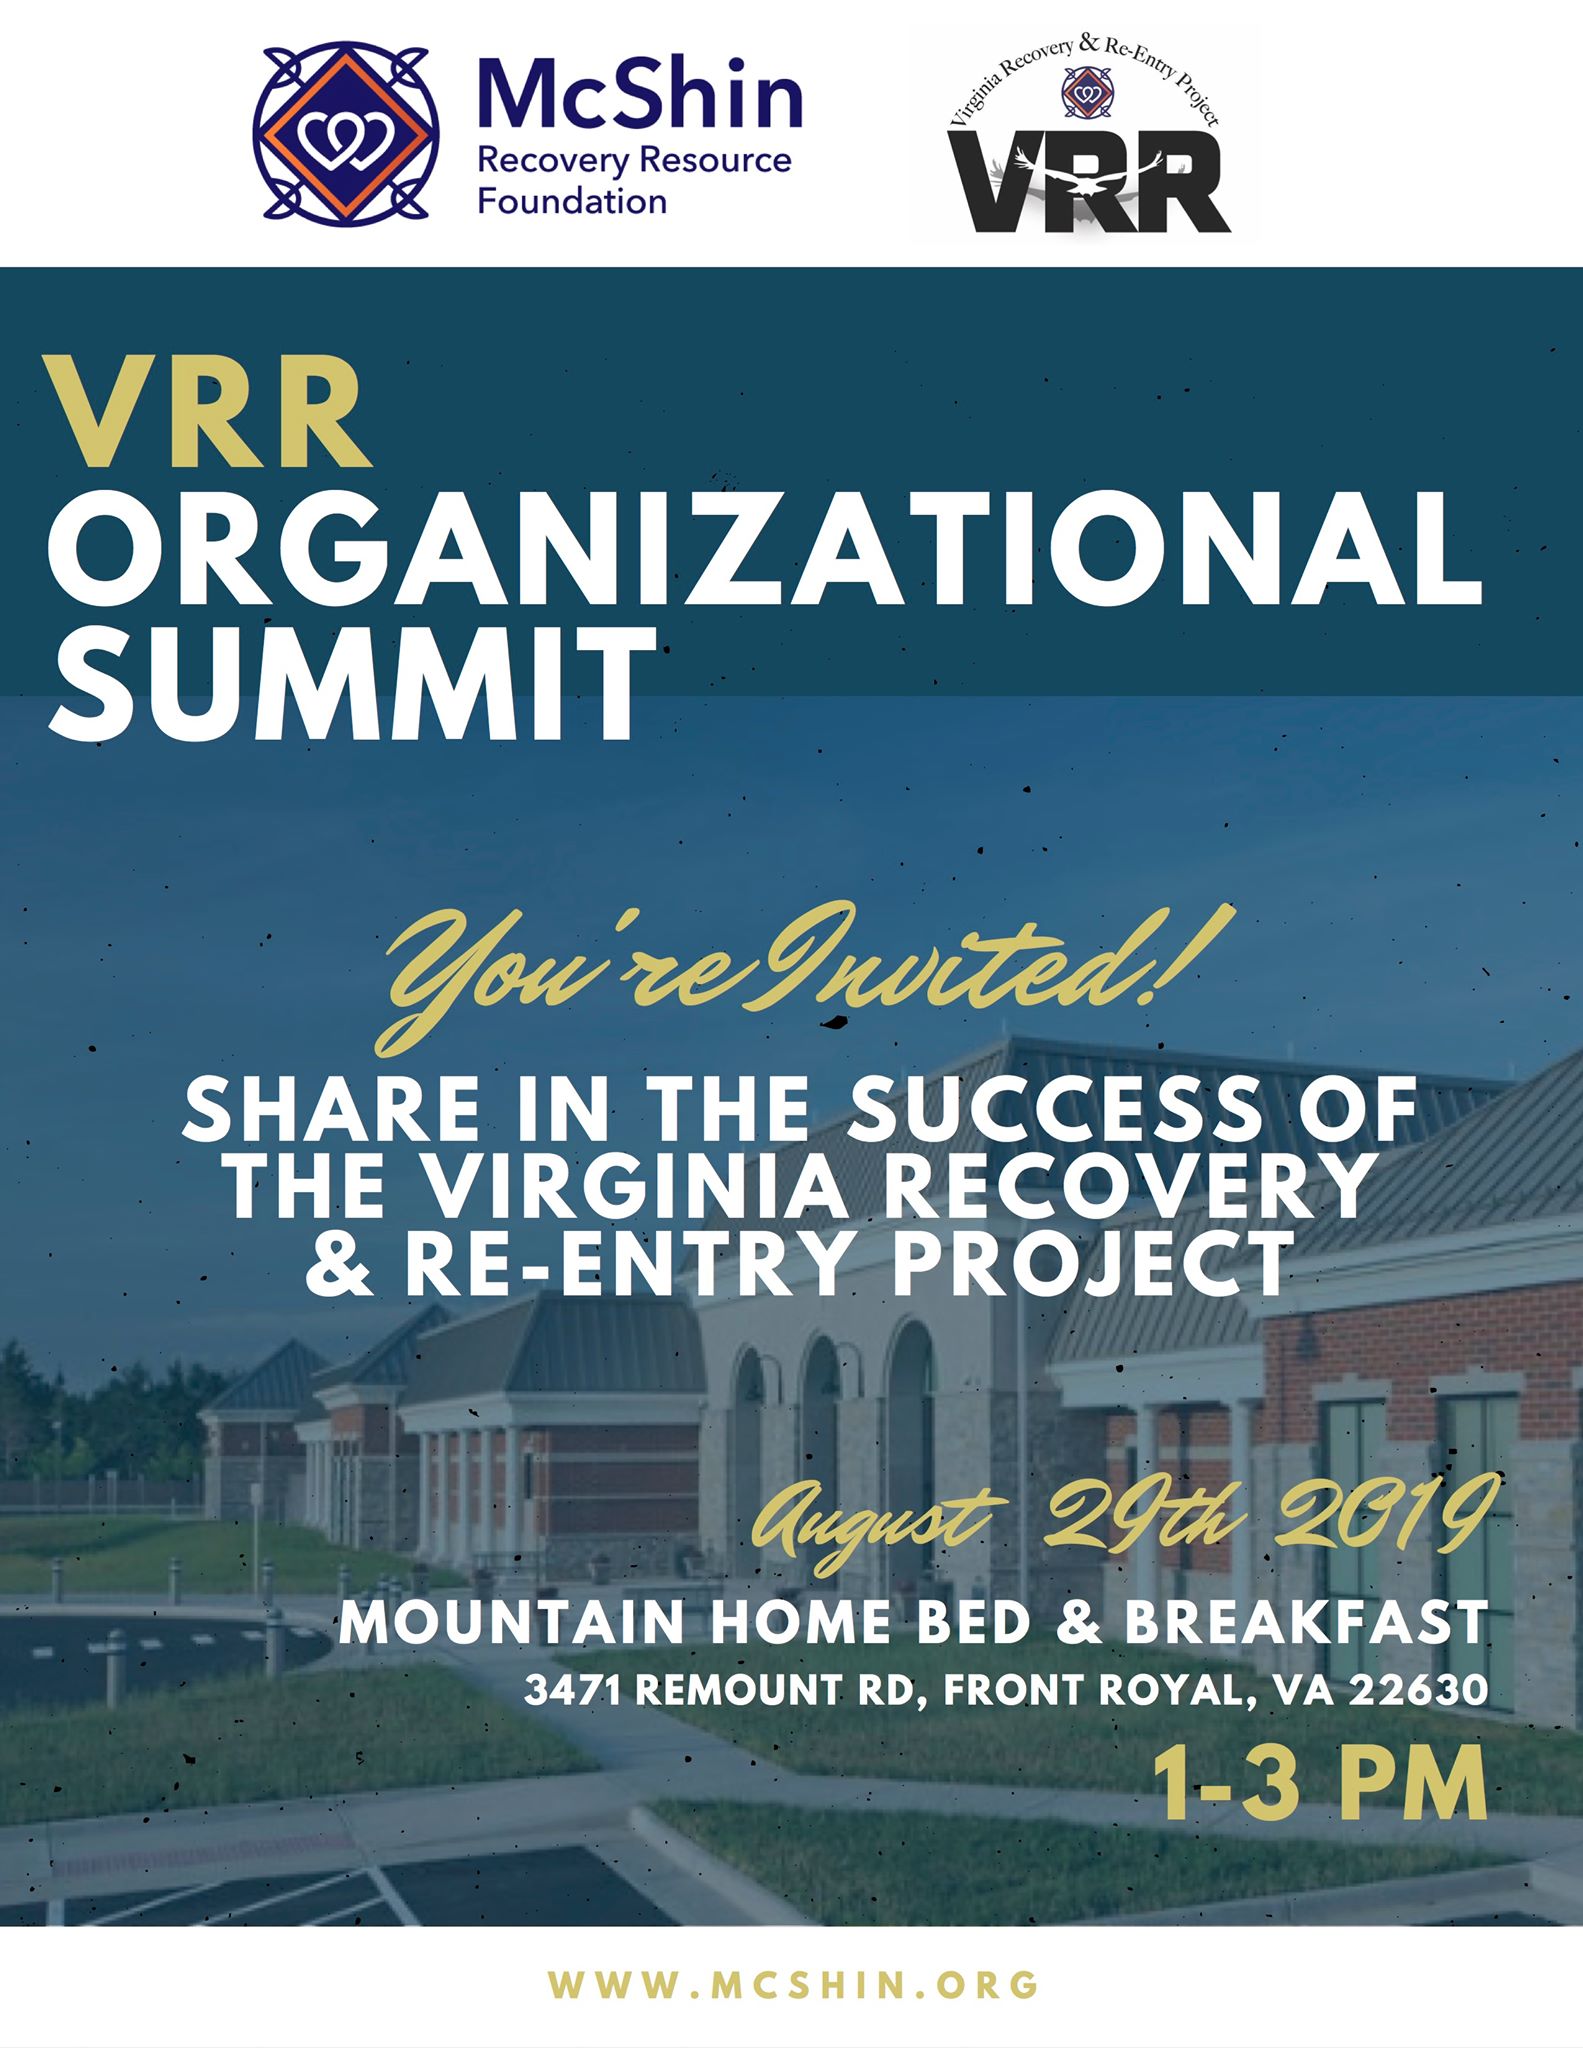 Flyer for VRR event